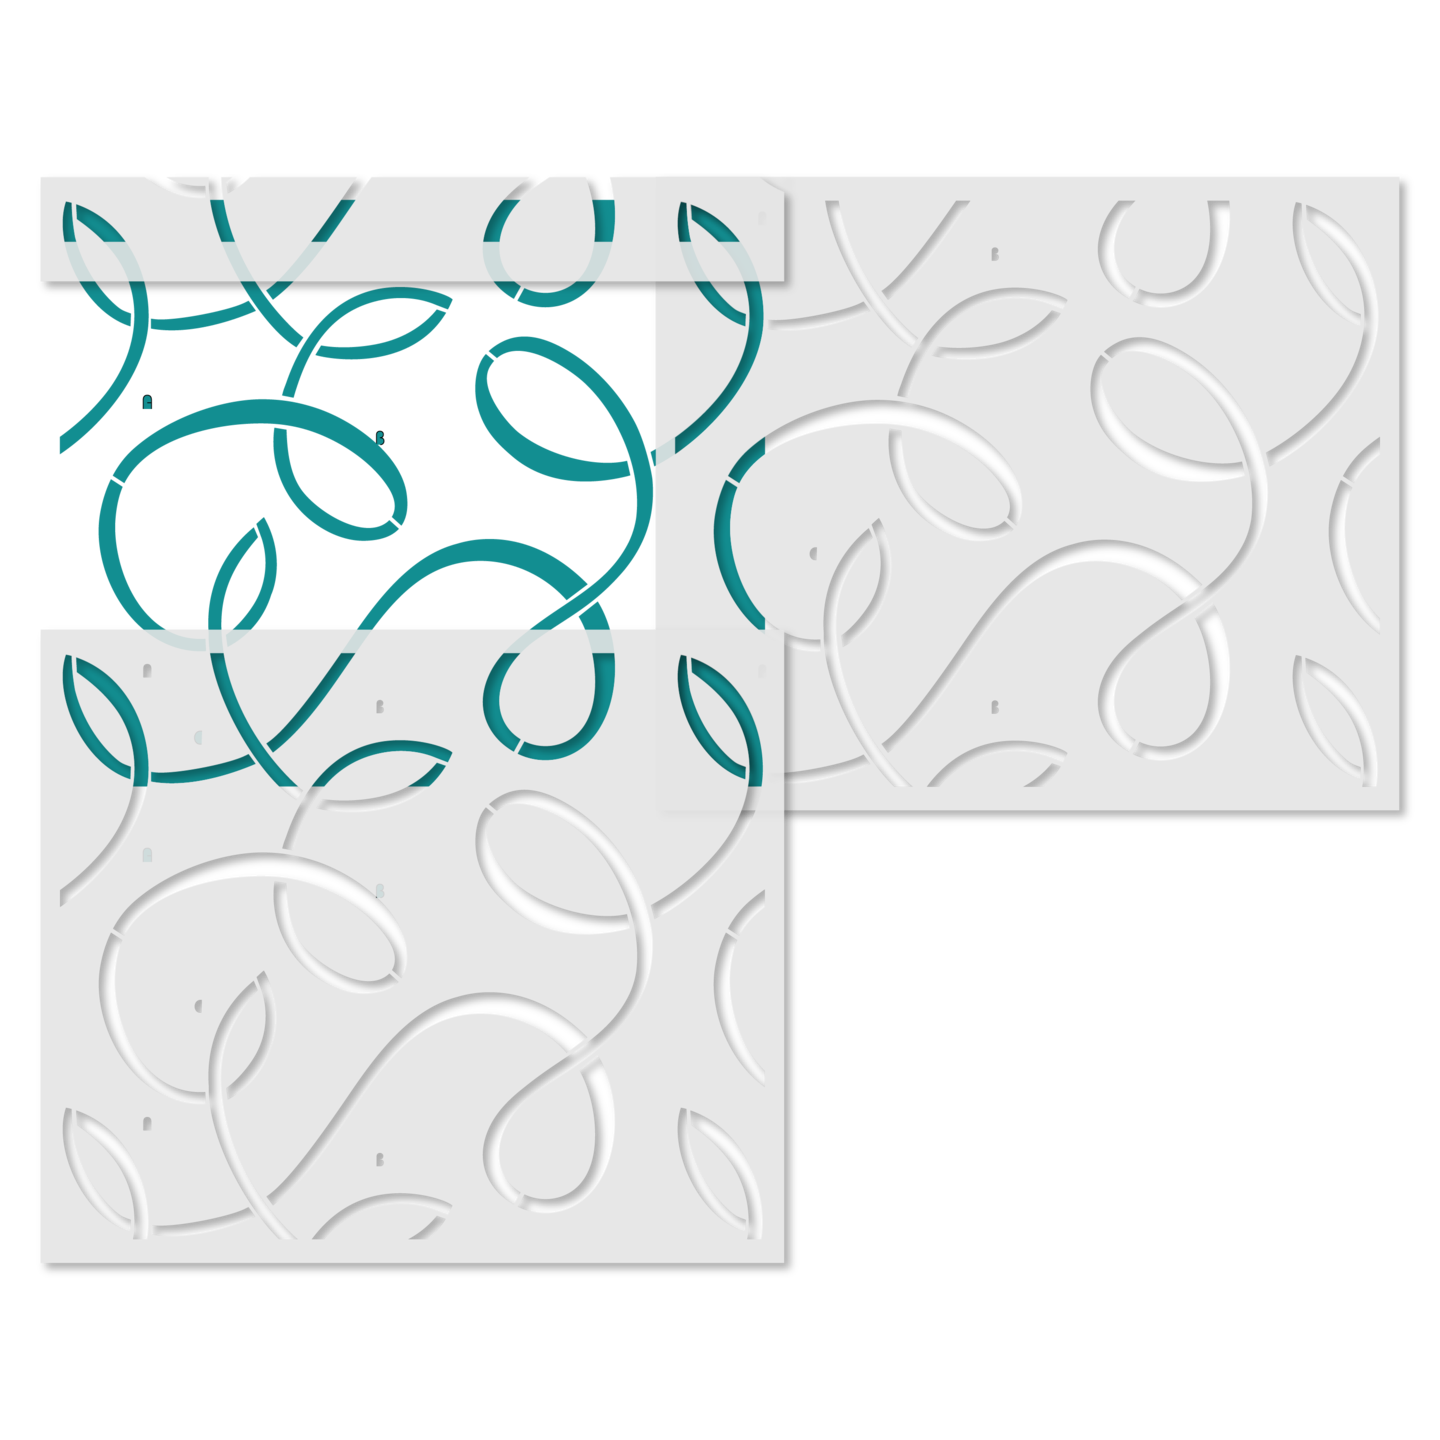 Leafy Swirls All Over Wall Stencil | 3720 by Designer Stencils | Pattern Stencils | Reusable Stencils for Painting | Safe &#x26; Reusable Template for Wall Decor | Try This Stencil Instead of a Wallpaper | Easy to Use &#x26; Clean Art Stencil Pattern